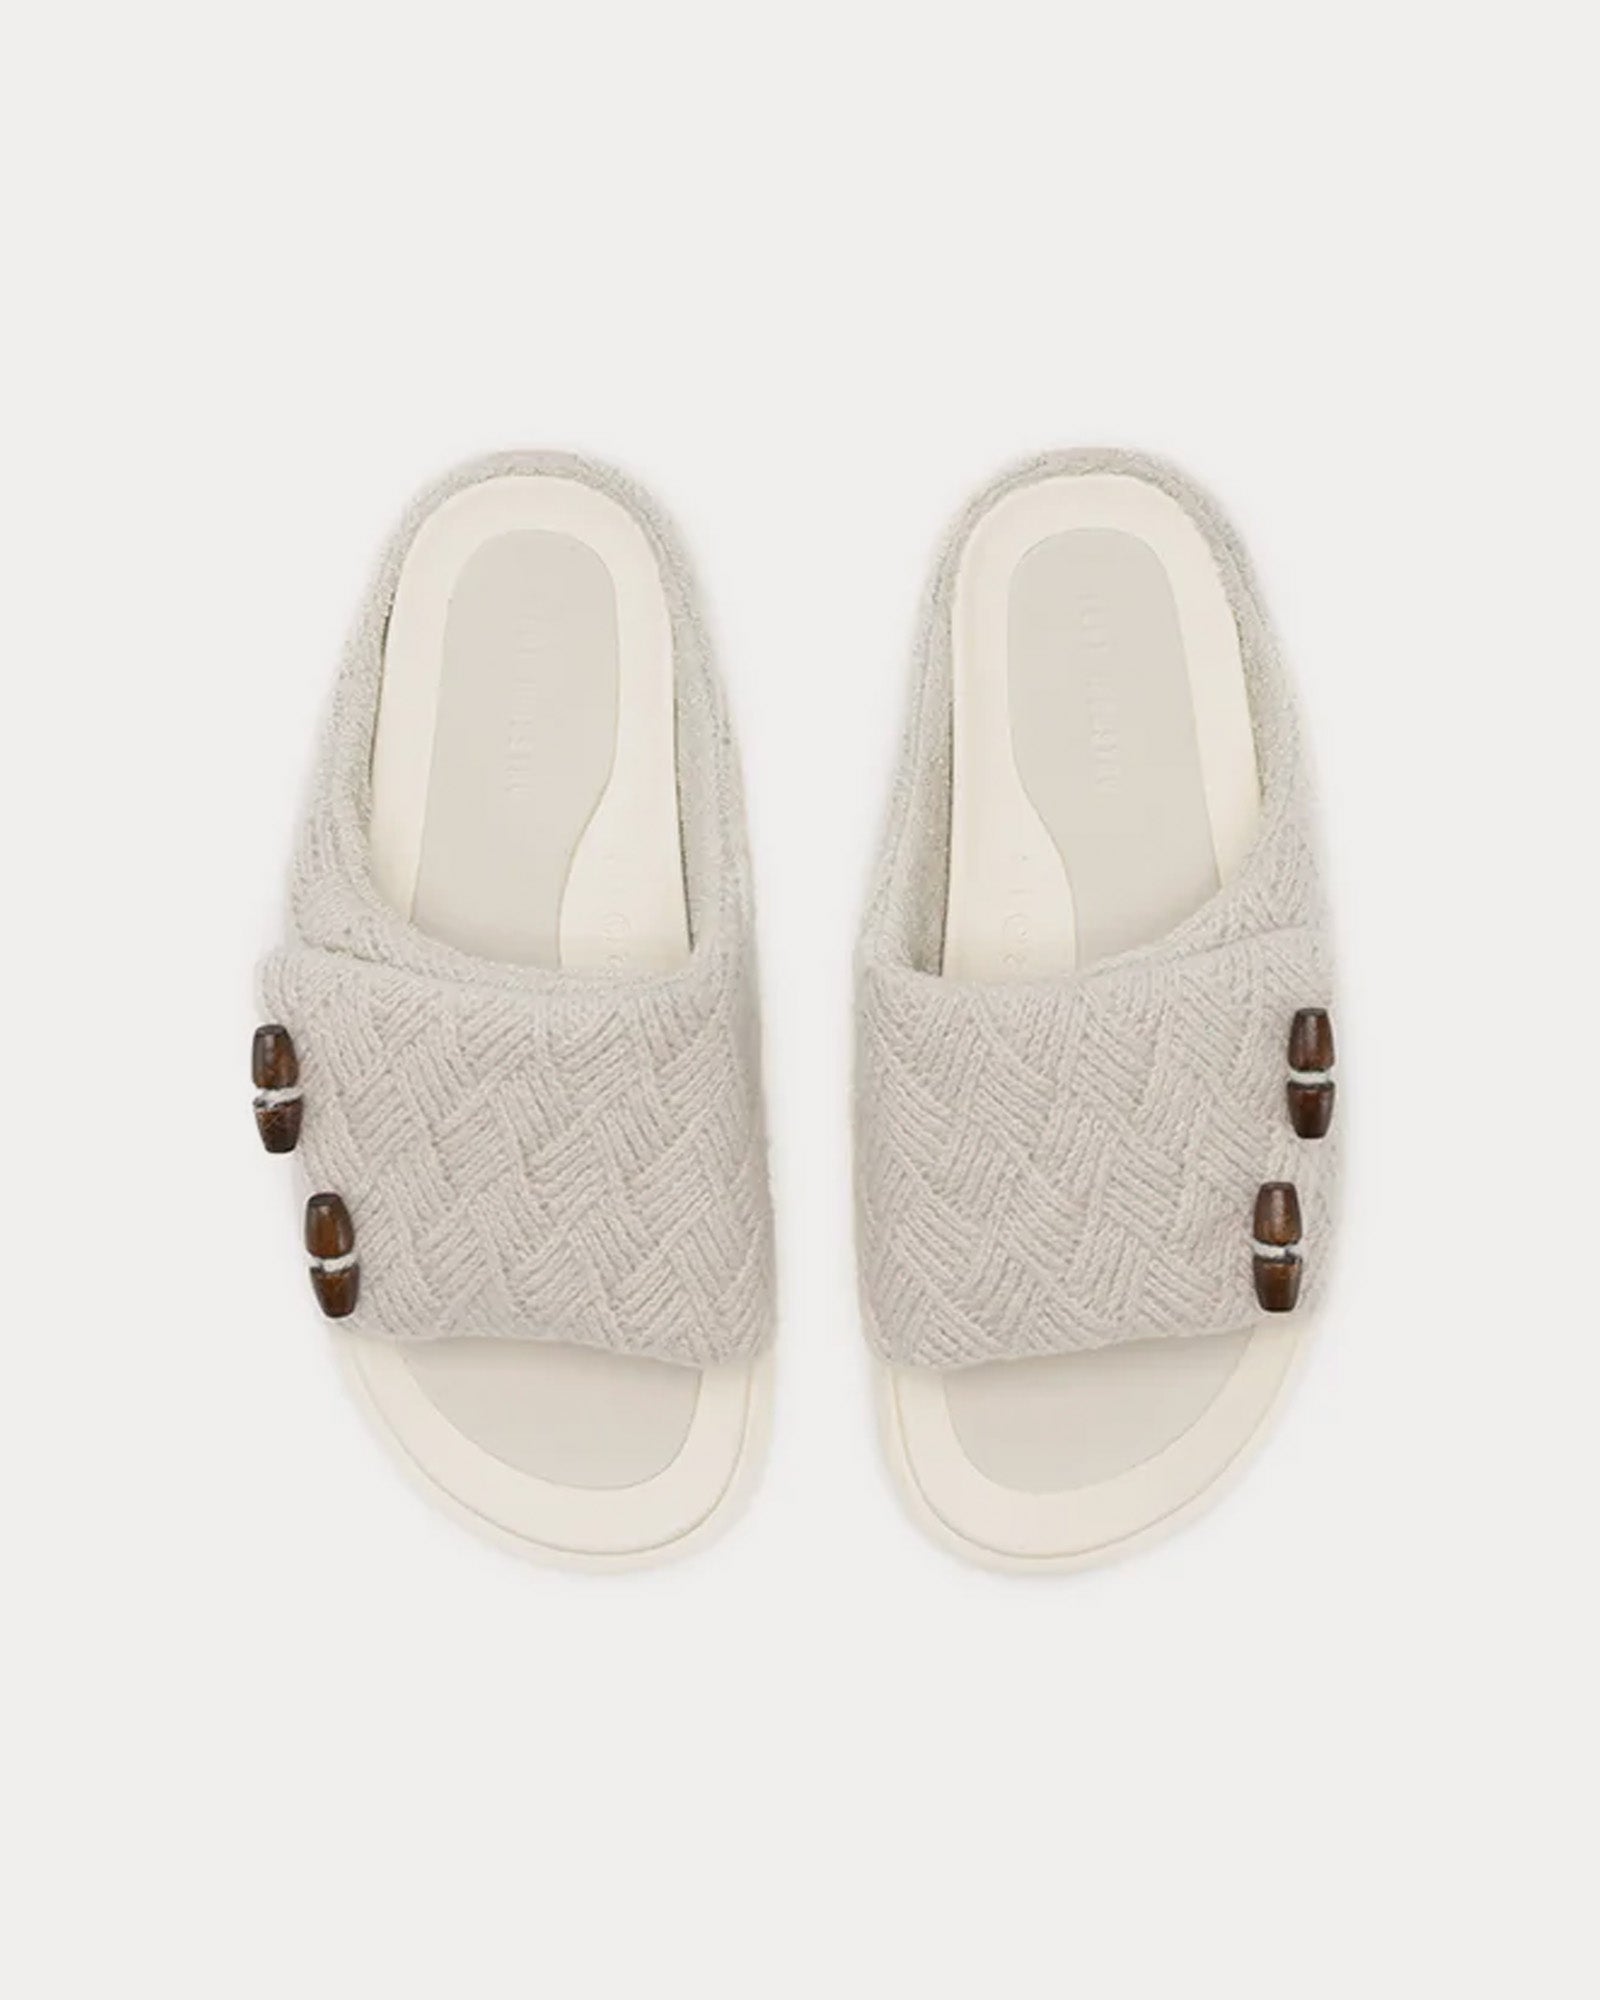 Foot Industry - Knitting Cream White Sandals